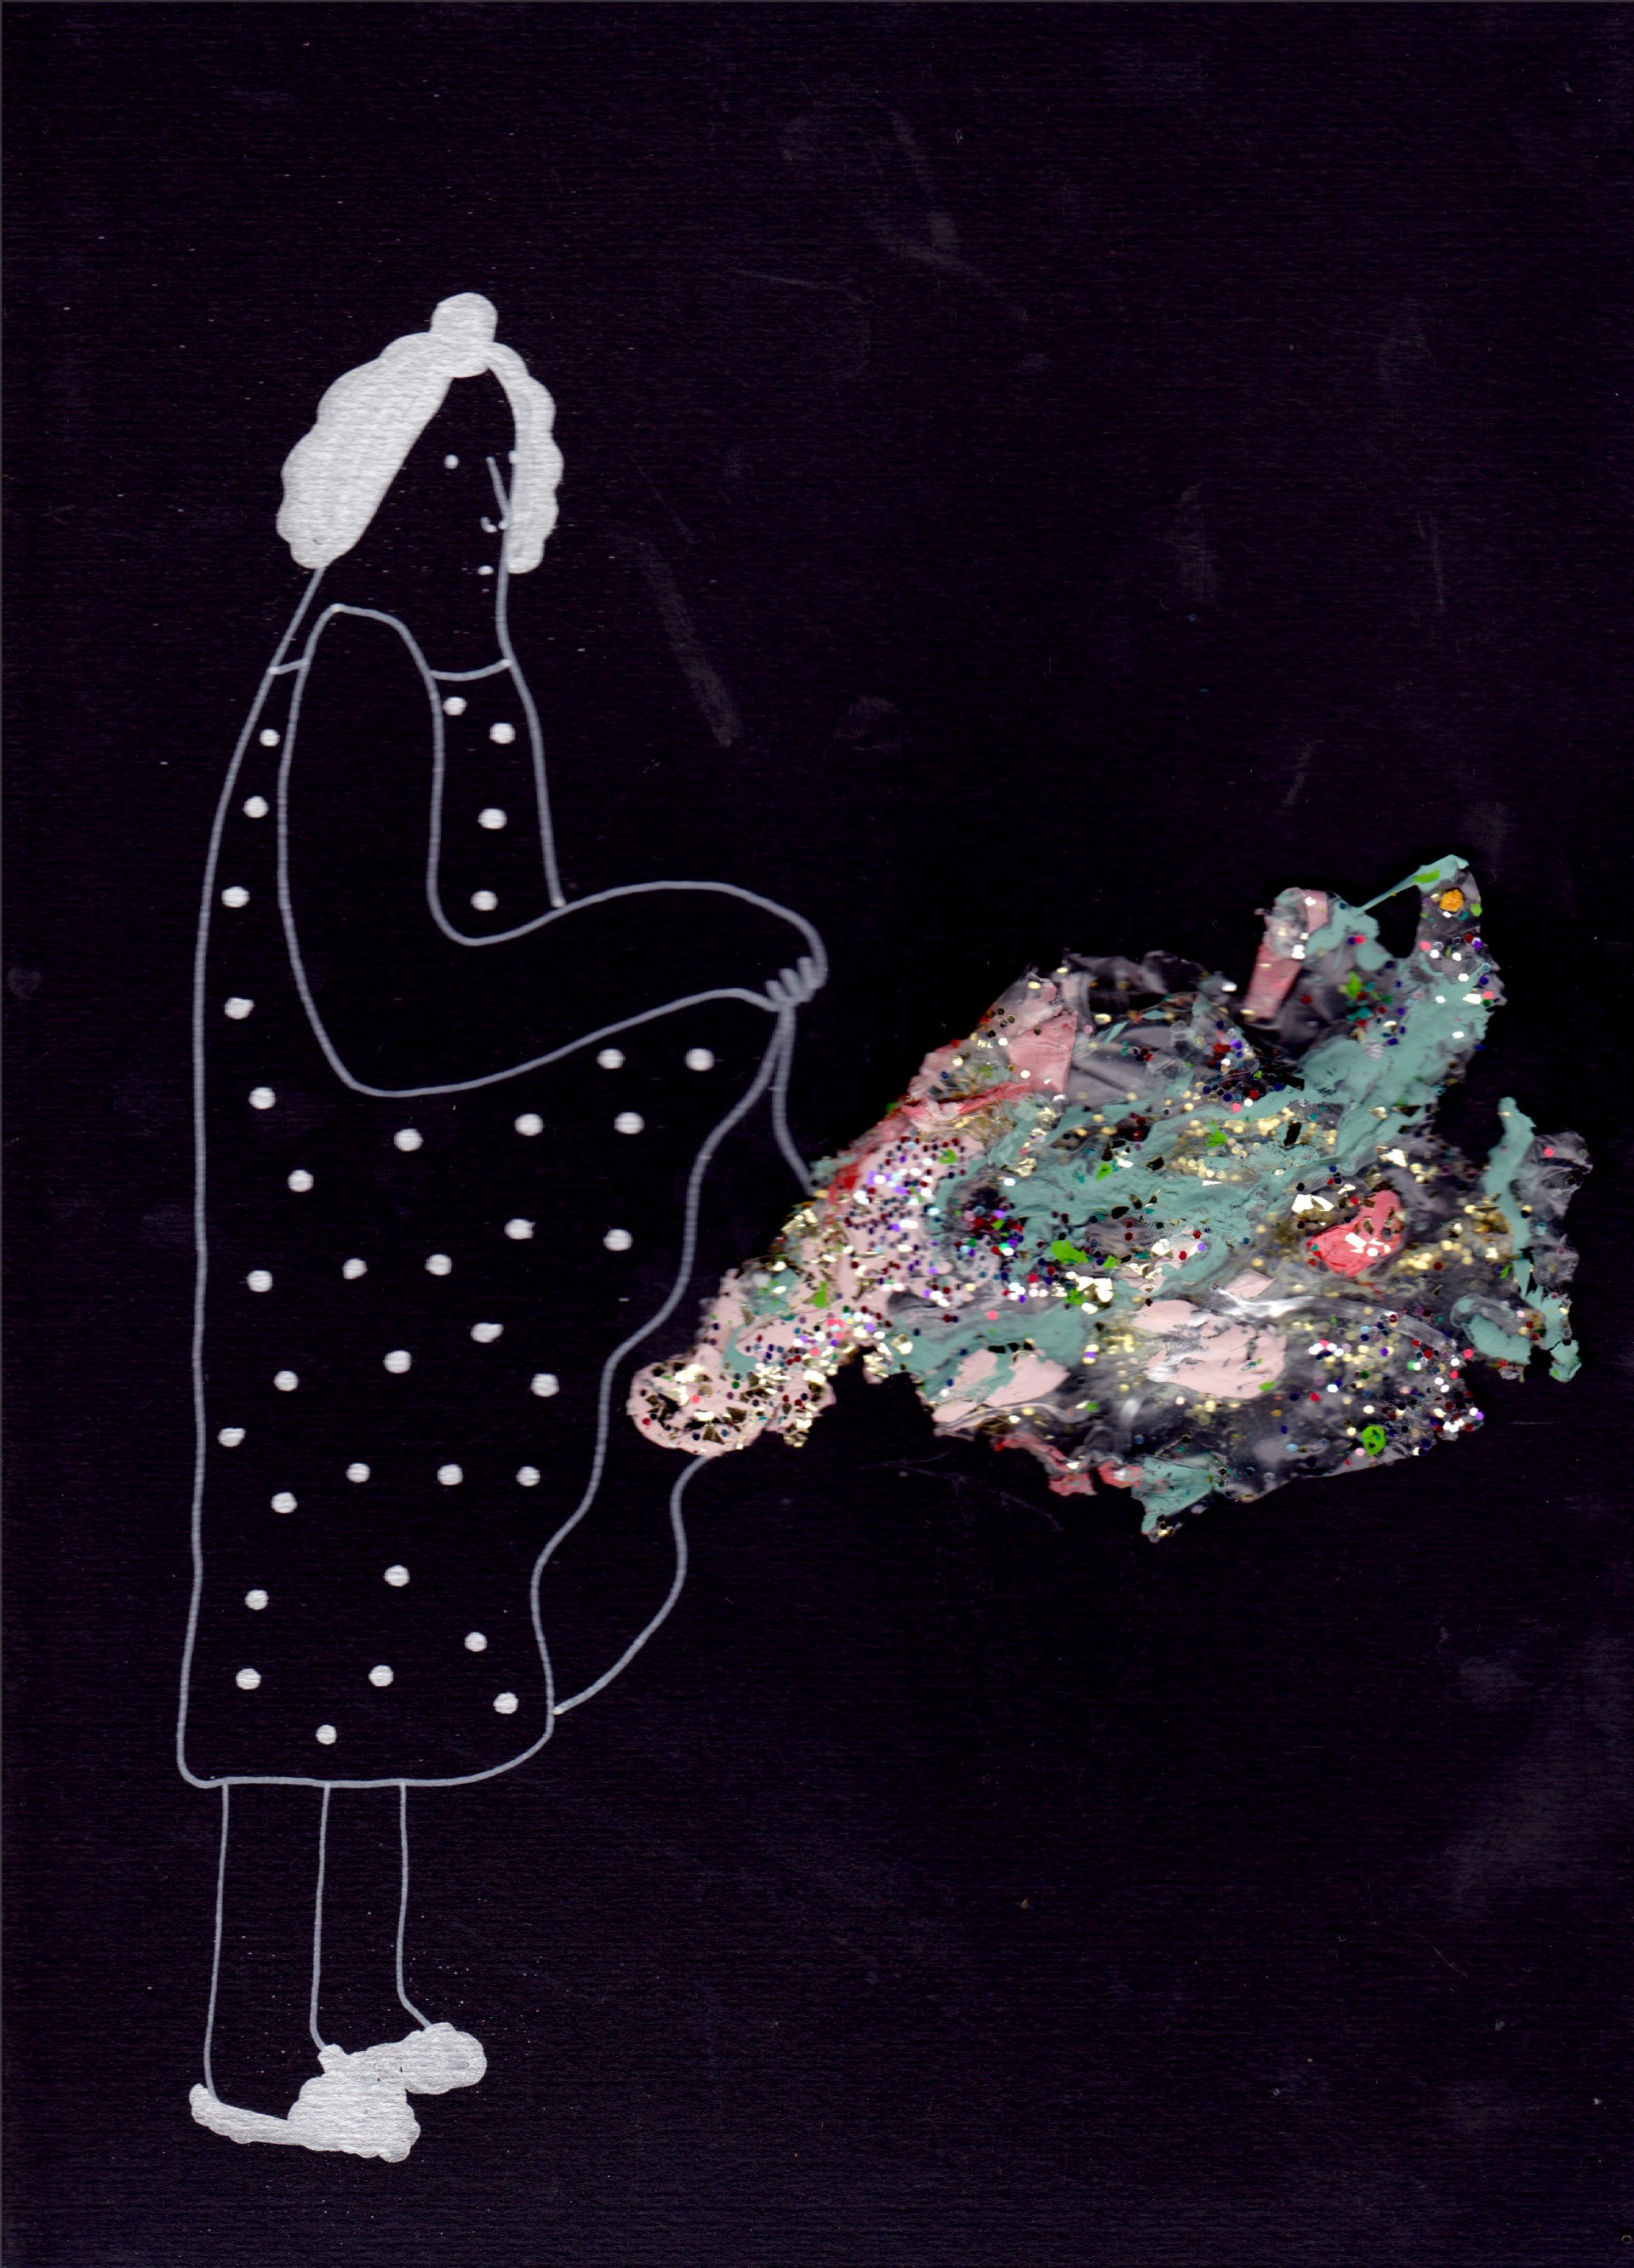 Woman wearing polka dot dress and fuzzy slippers holding up dress with glitter mass coming out from underneath. Lines drawn in silver paint pen. Black background. 